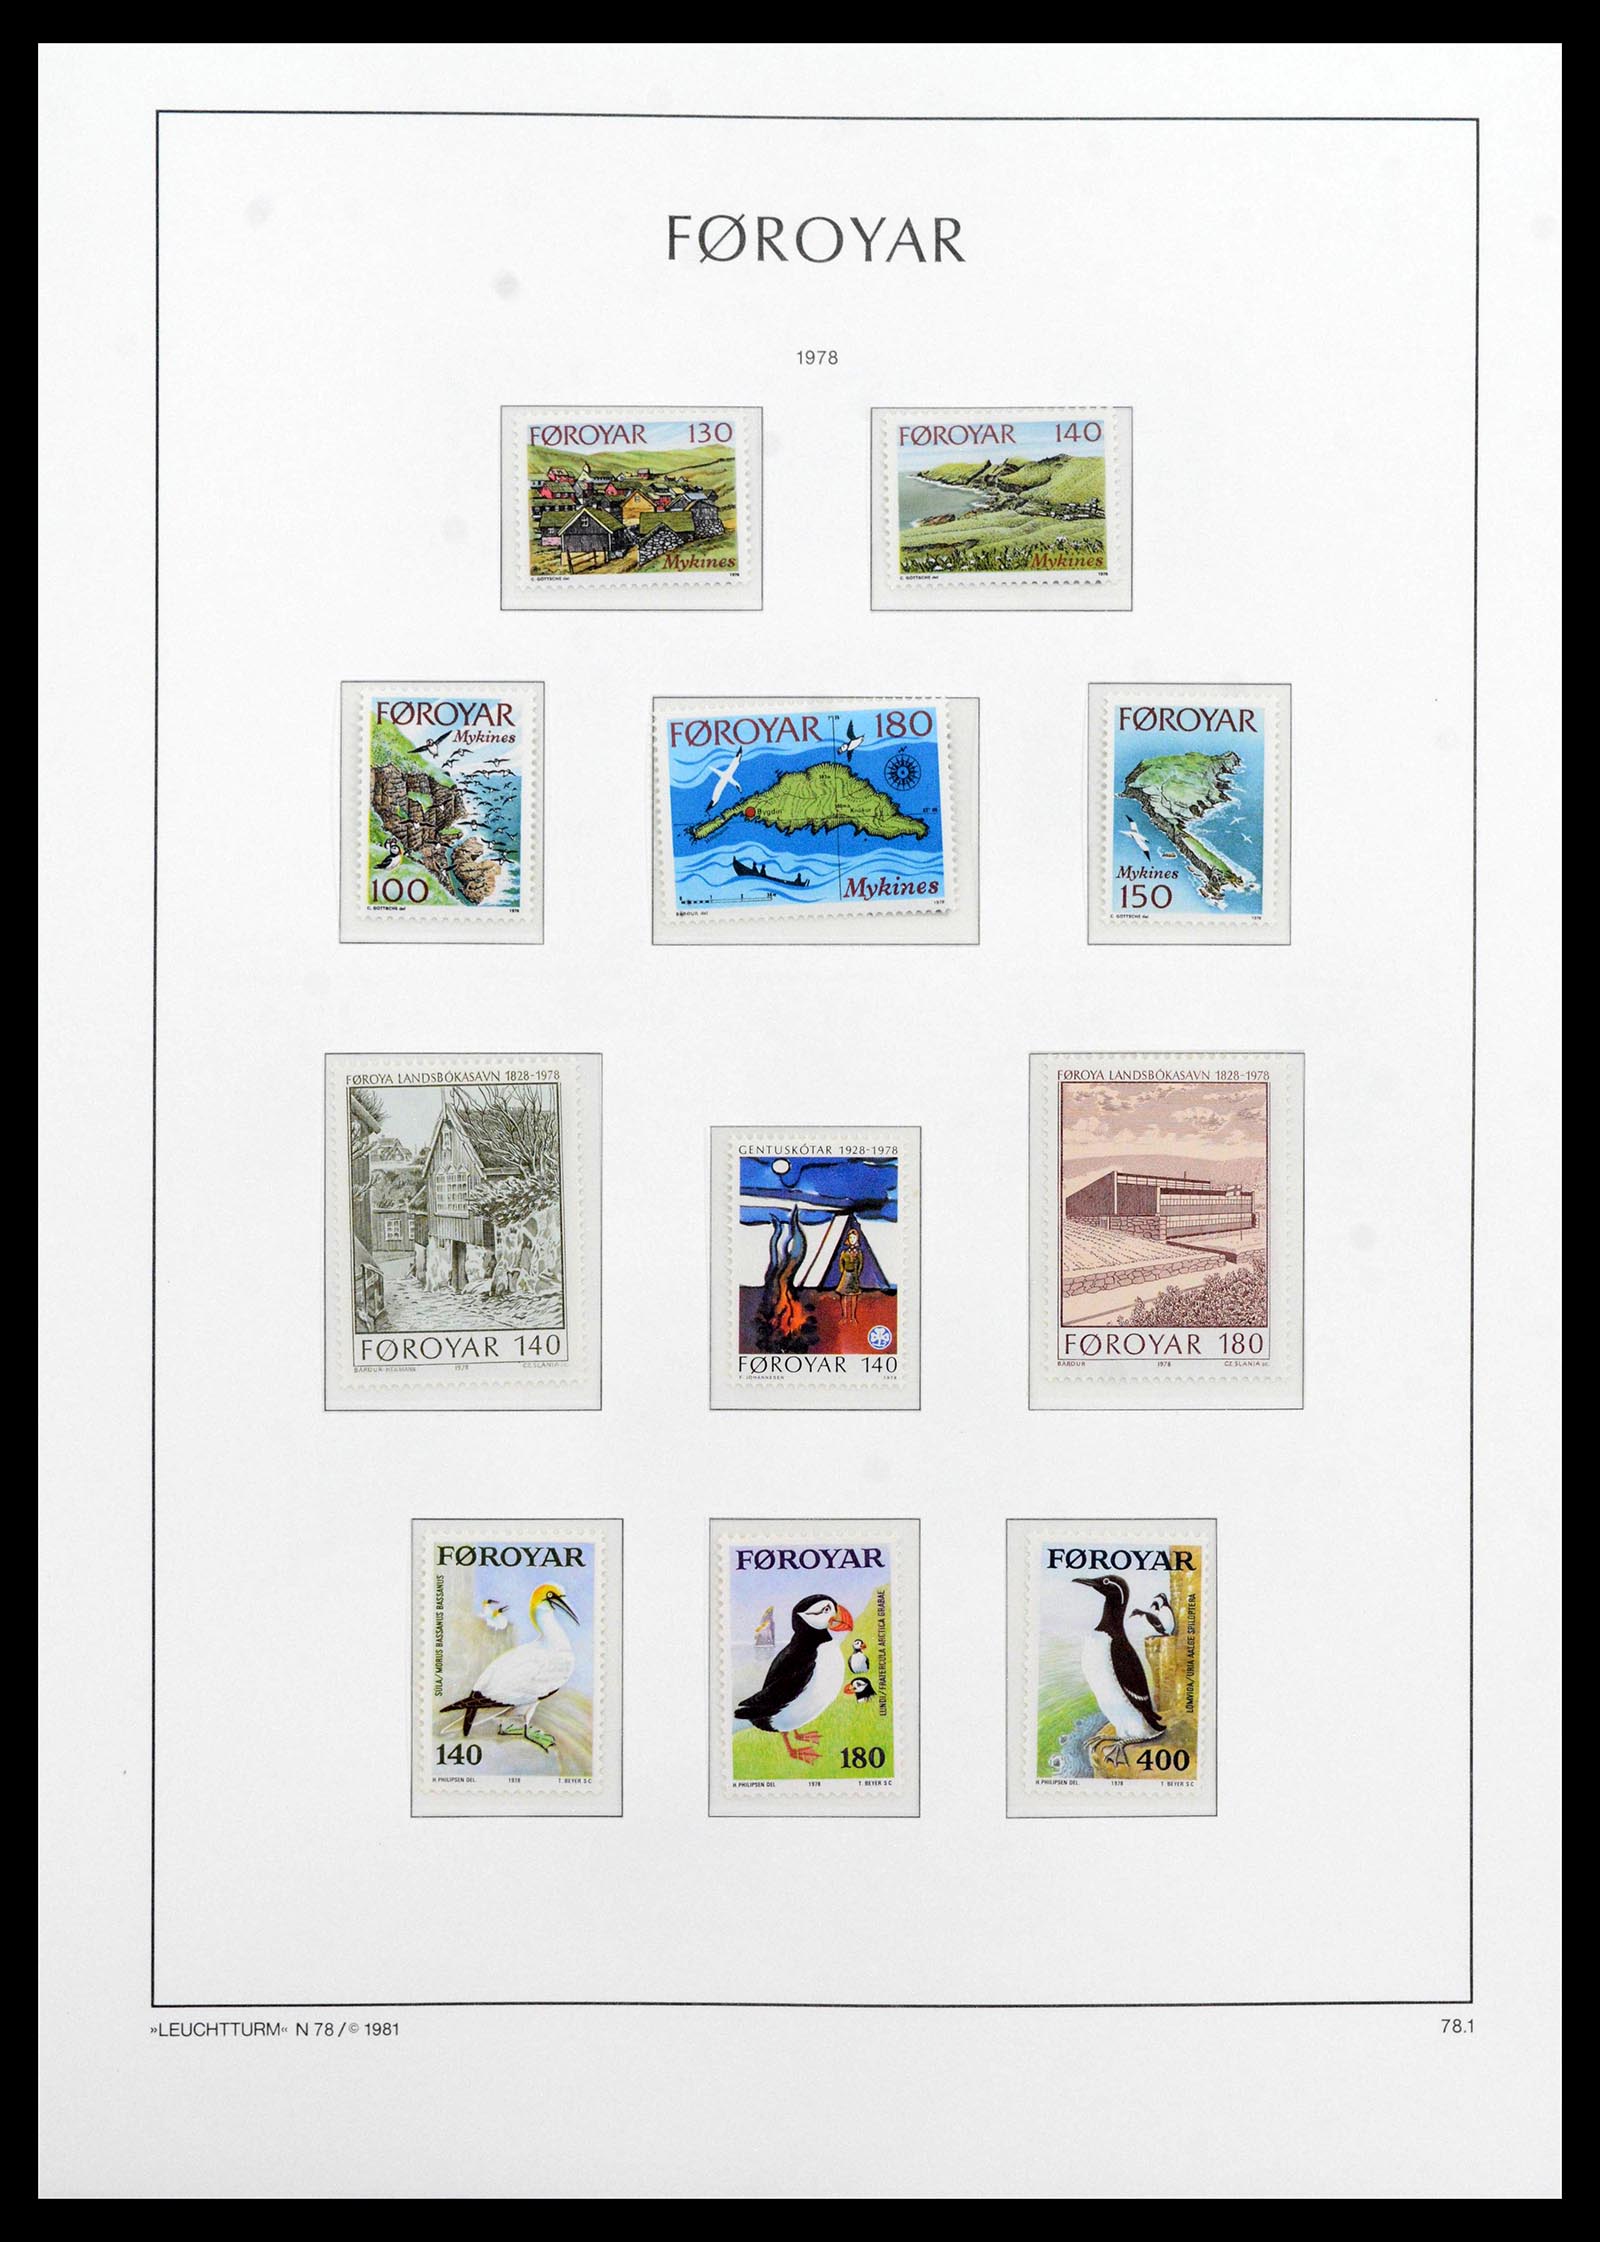 39021 0004 - Stamp collection 39021 Faroe islands 1940-2000.